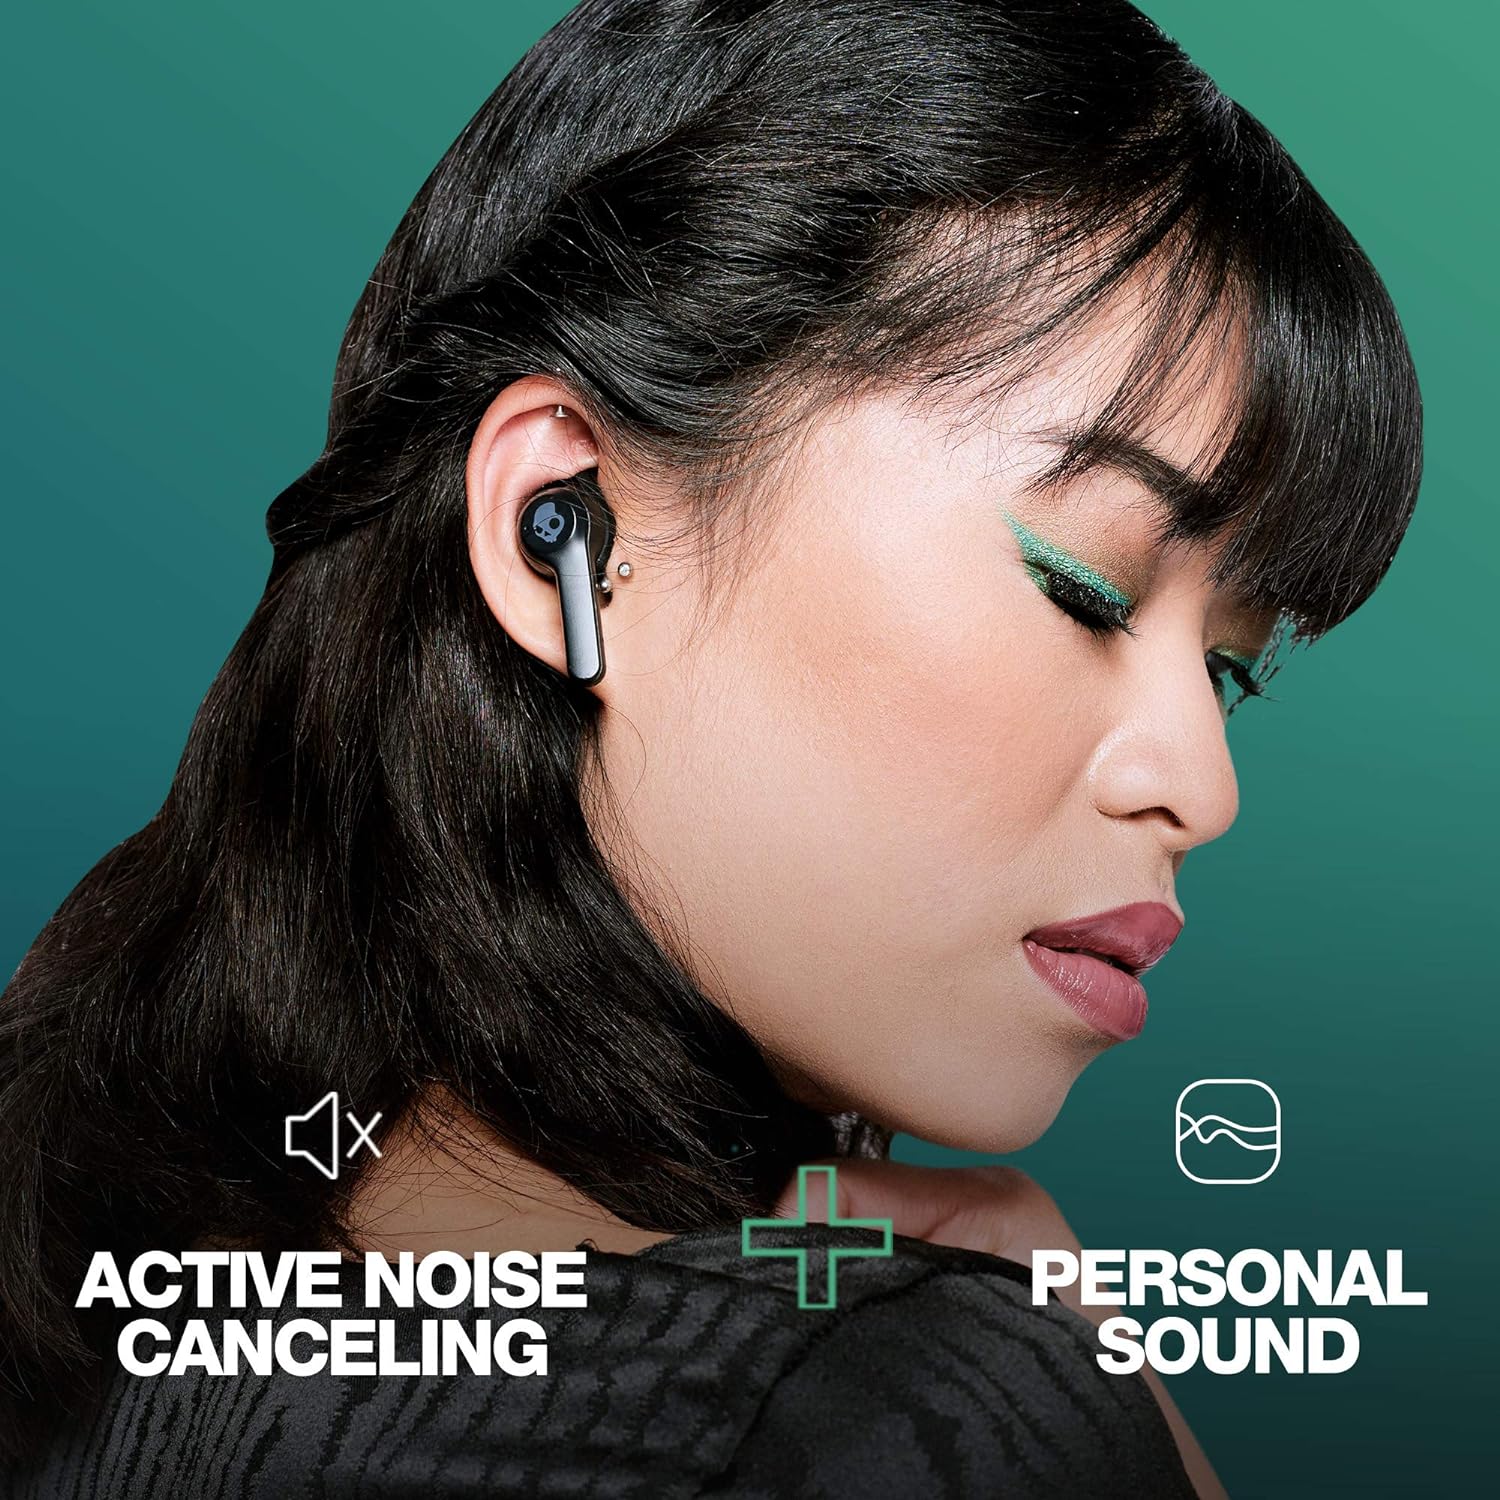 Skullcandy Indy XT ANC Active Noise Canceling True Wireless Earbuds, True Black - image 3 of 11